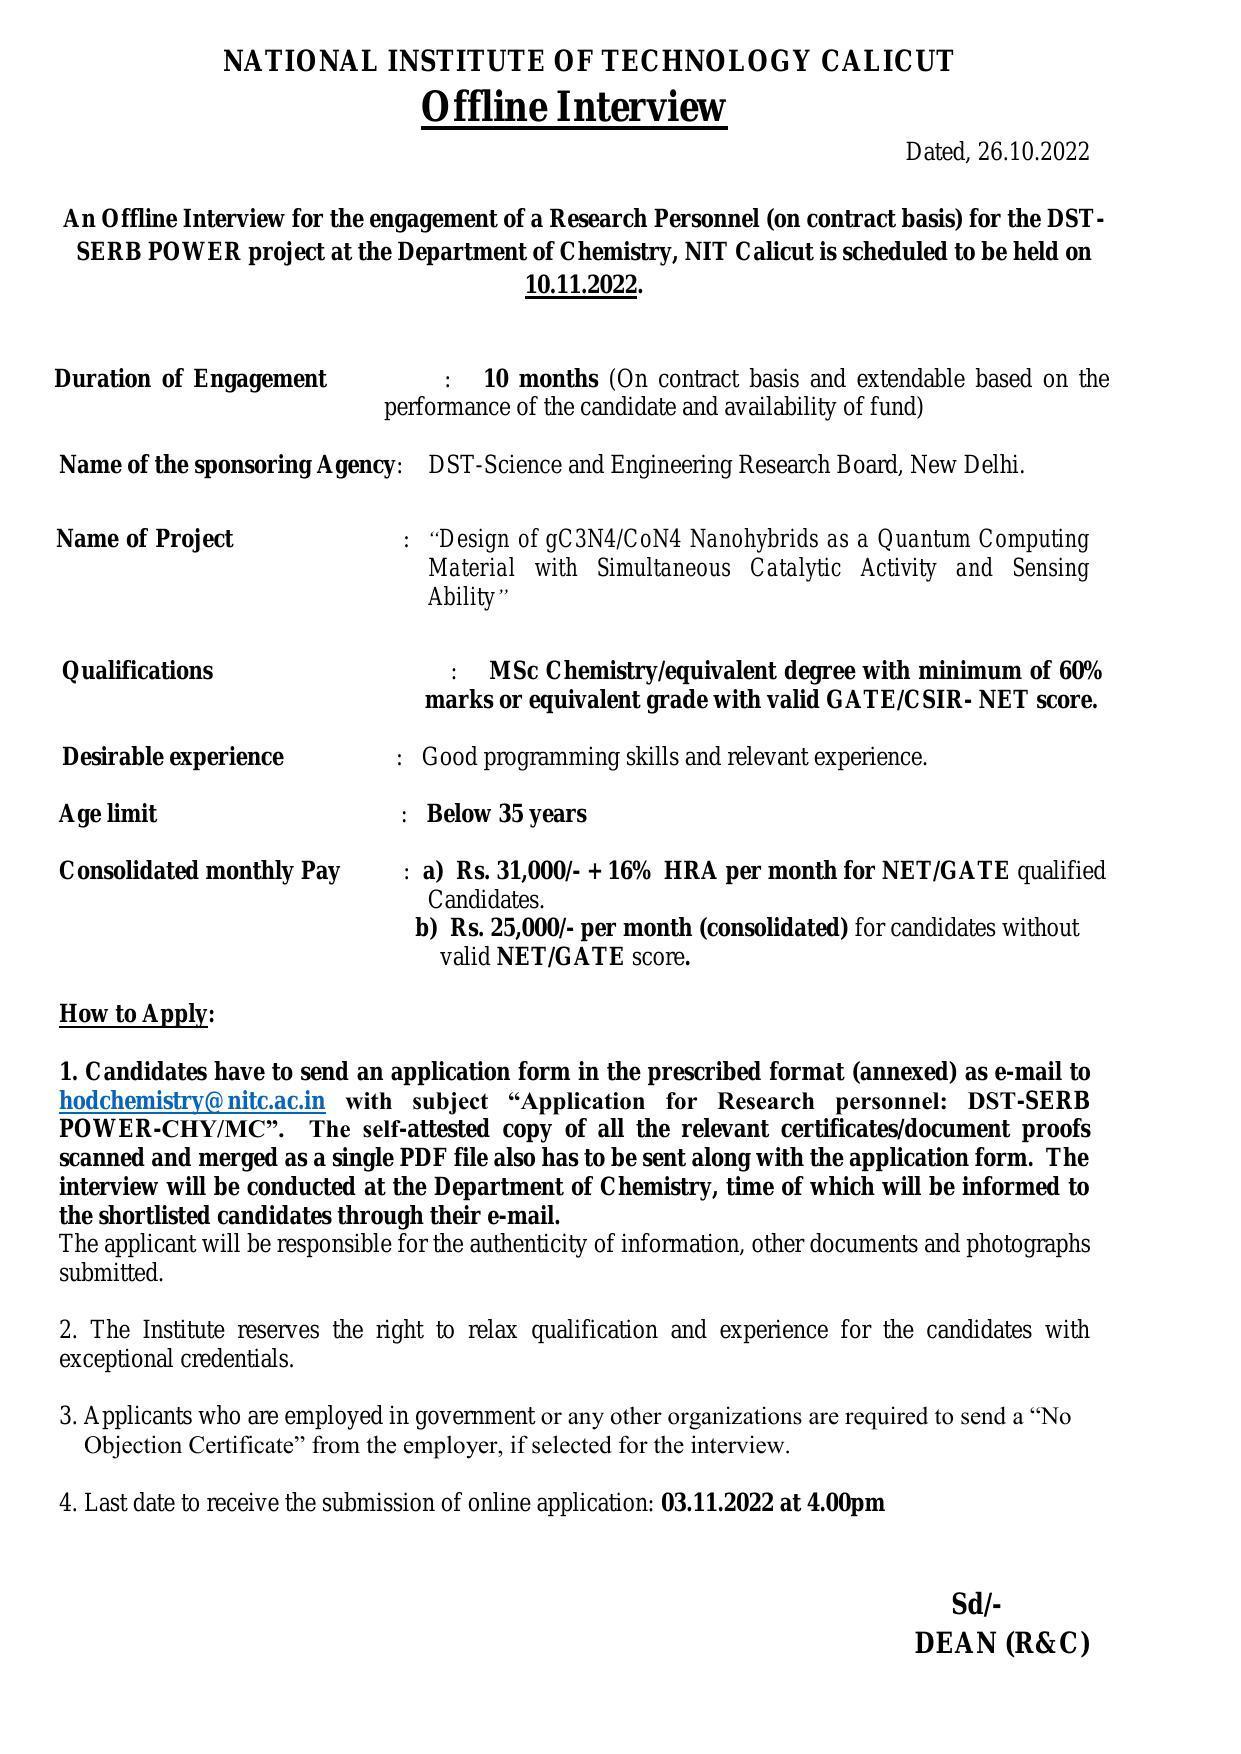 National Institute of Technology Calicut Invites Application for Research Personnel Recruitment 2022 - Page 2